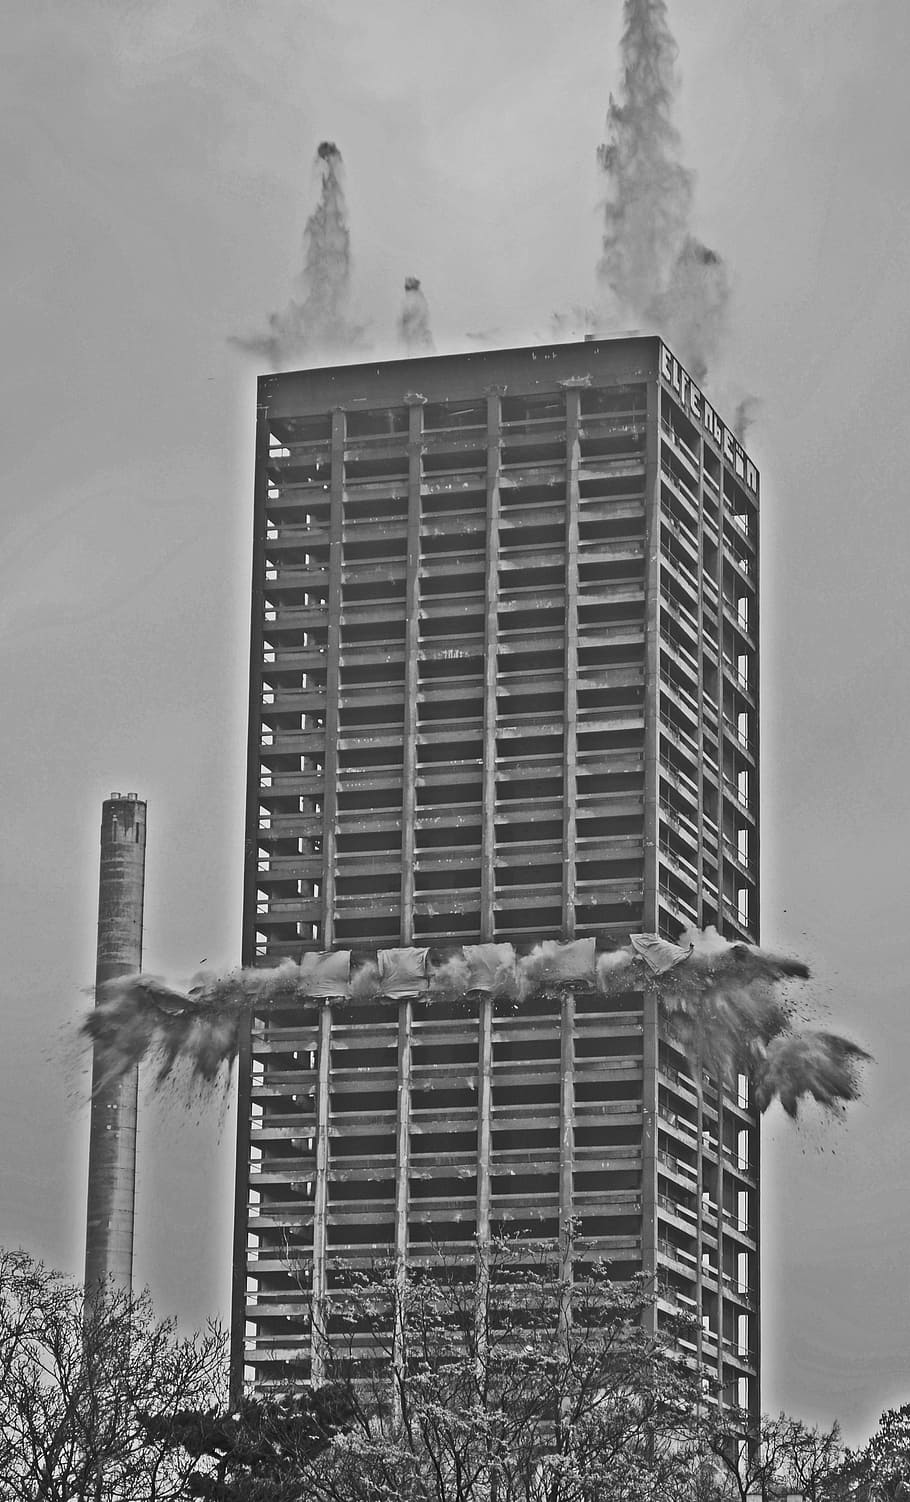 blowing up, afe tower, frankfurt, demolition, explosion, collapse, dilapidated, tear off, black And White, architecture